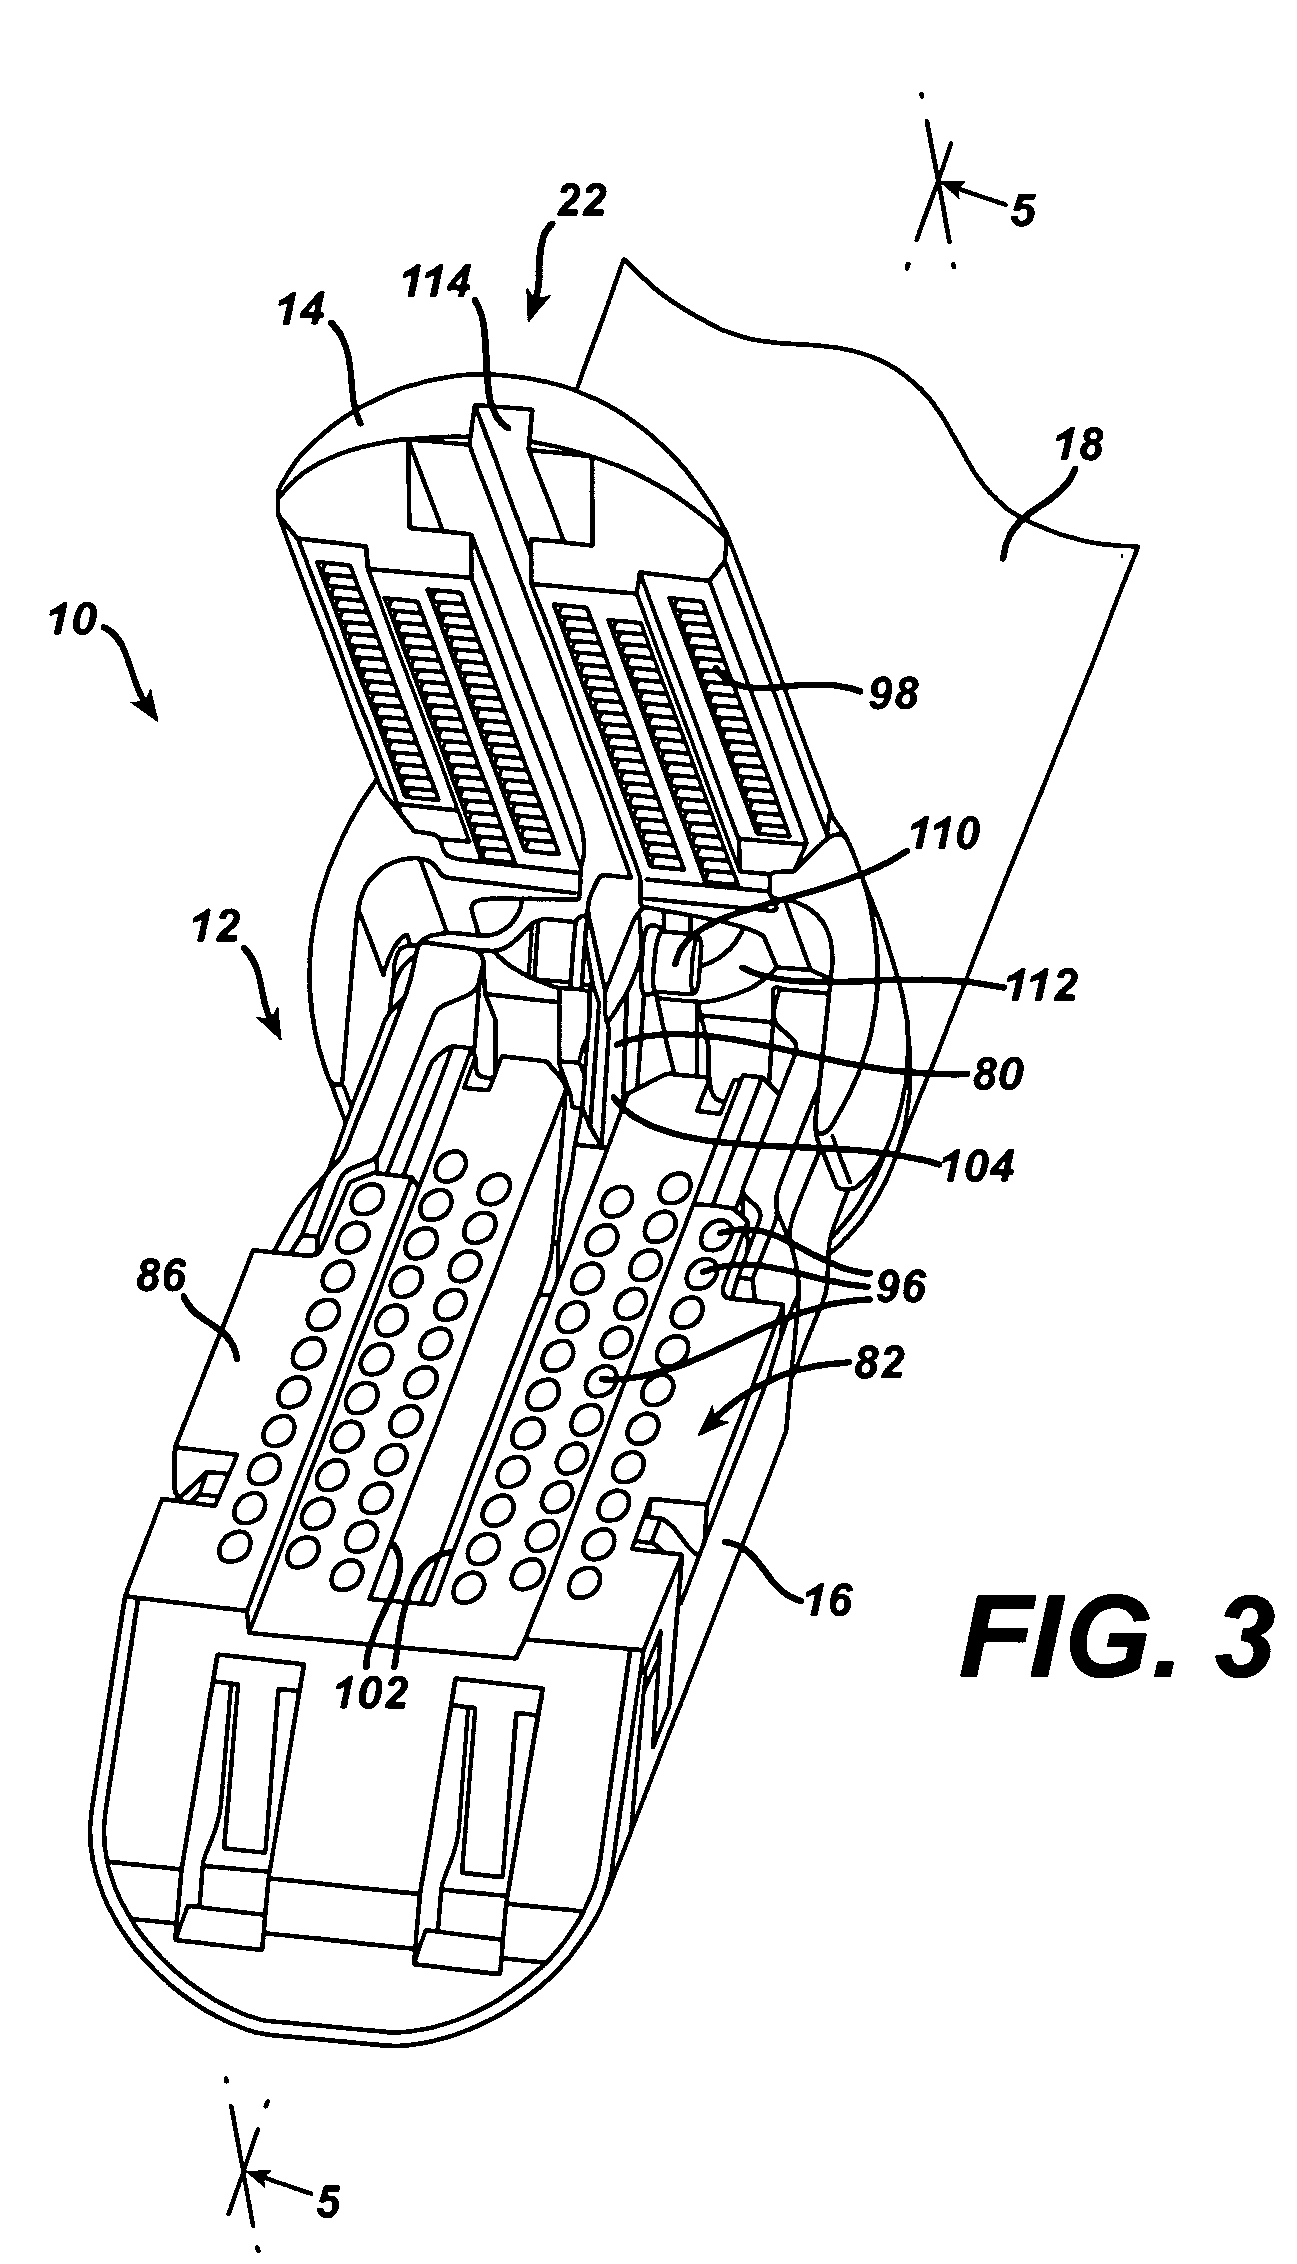 Surgical stapling instrument having multistroke firing with opening lockout